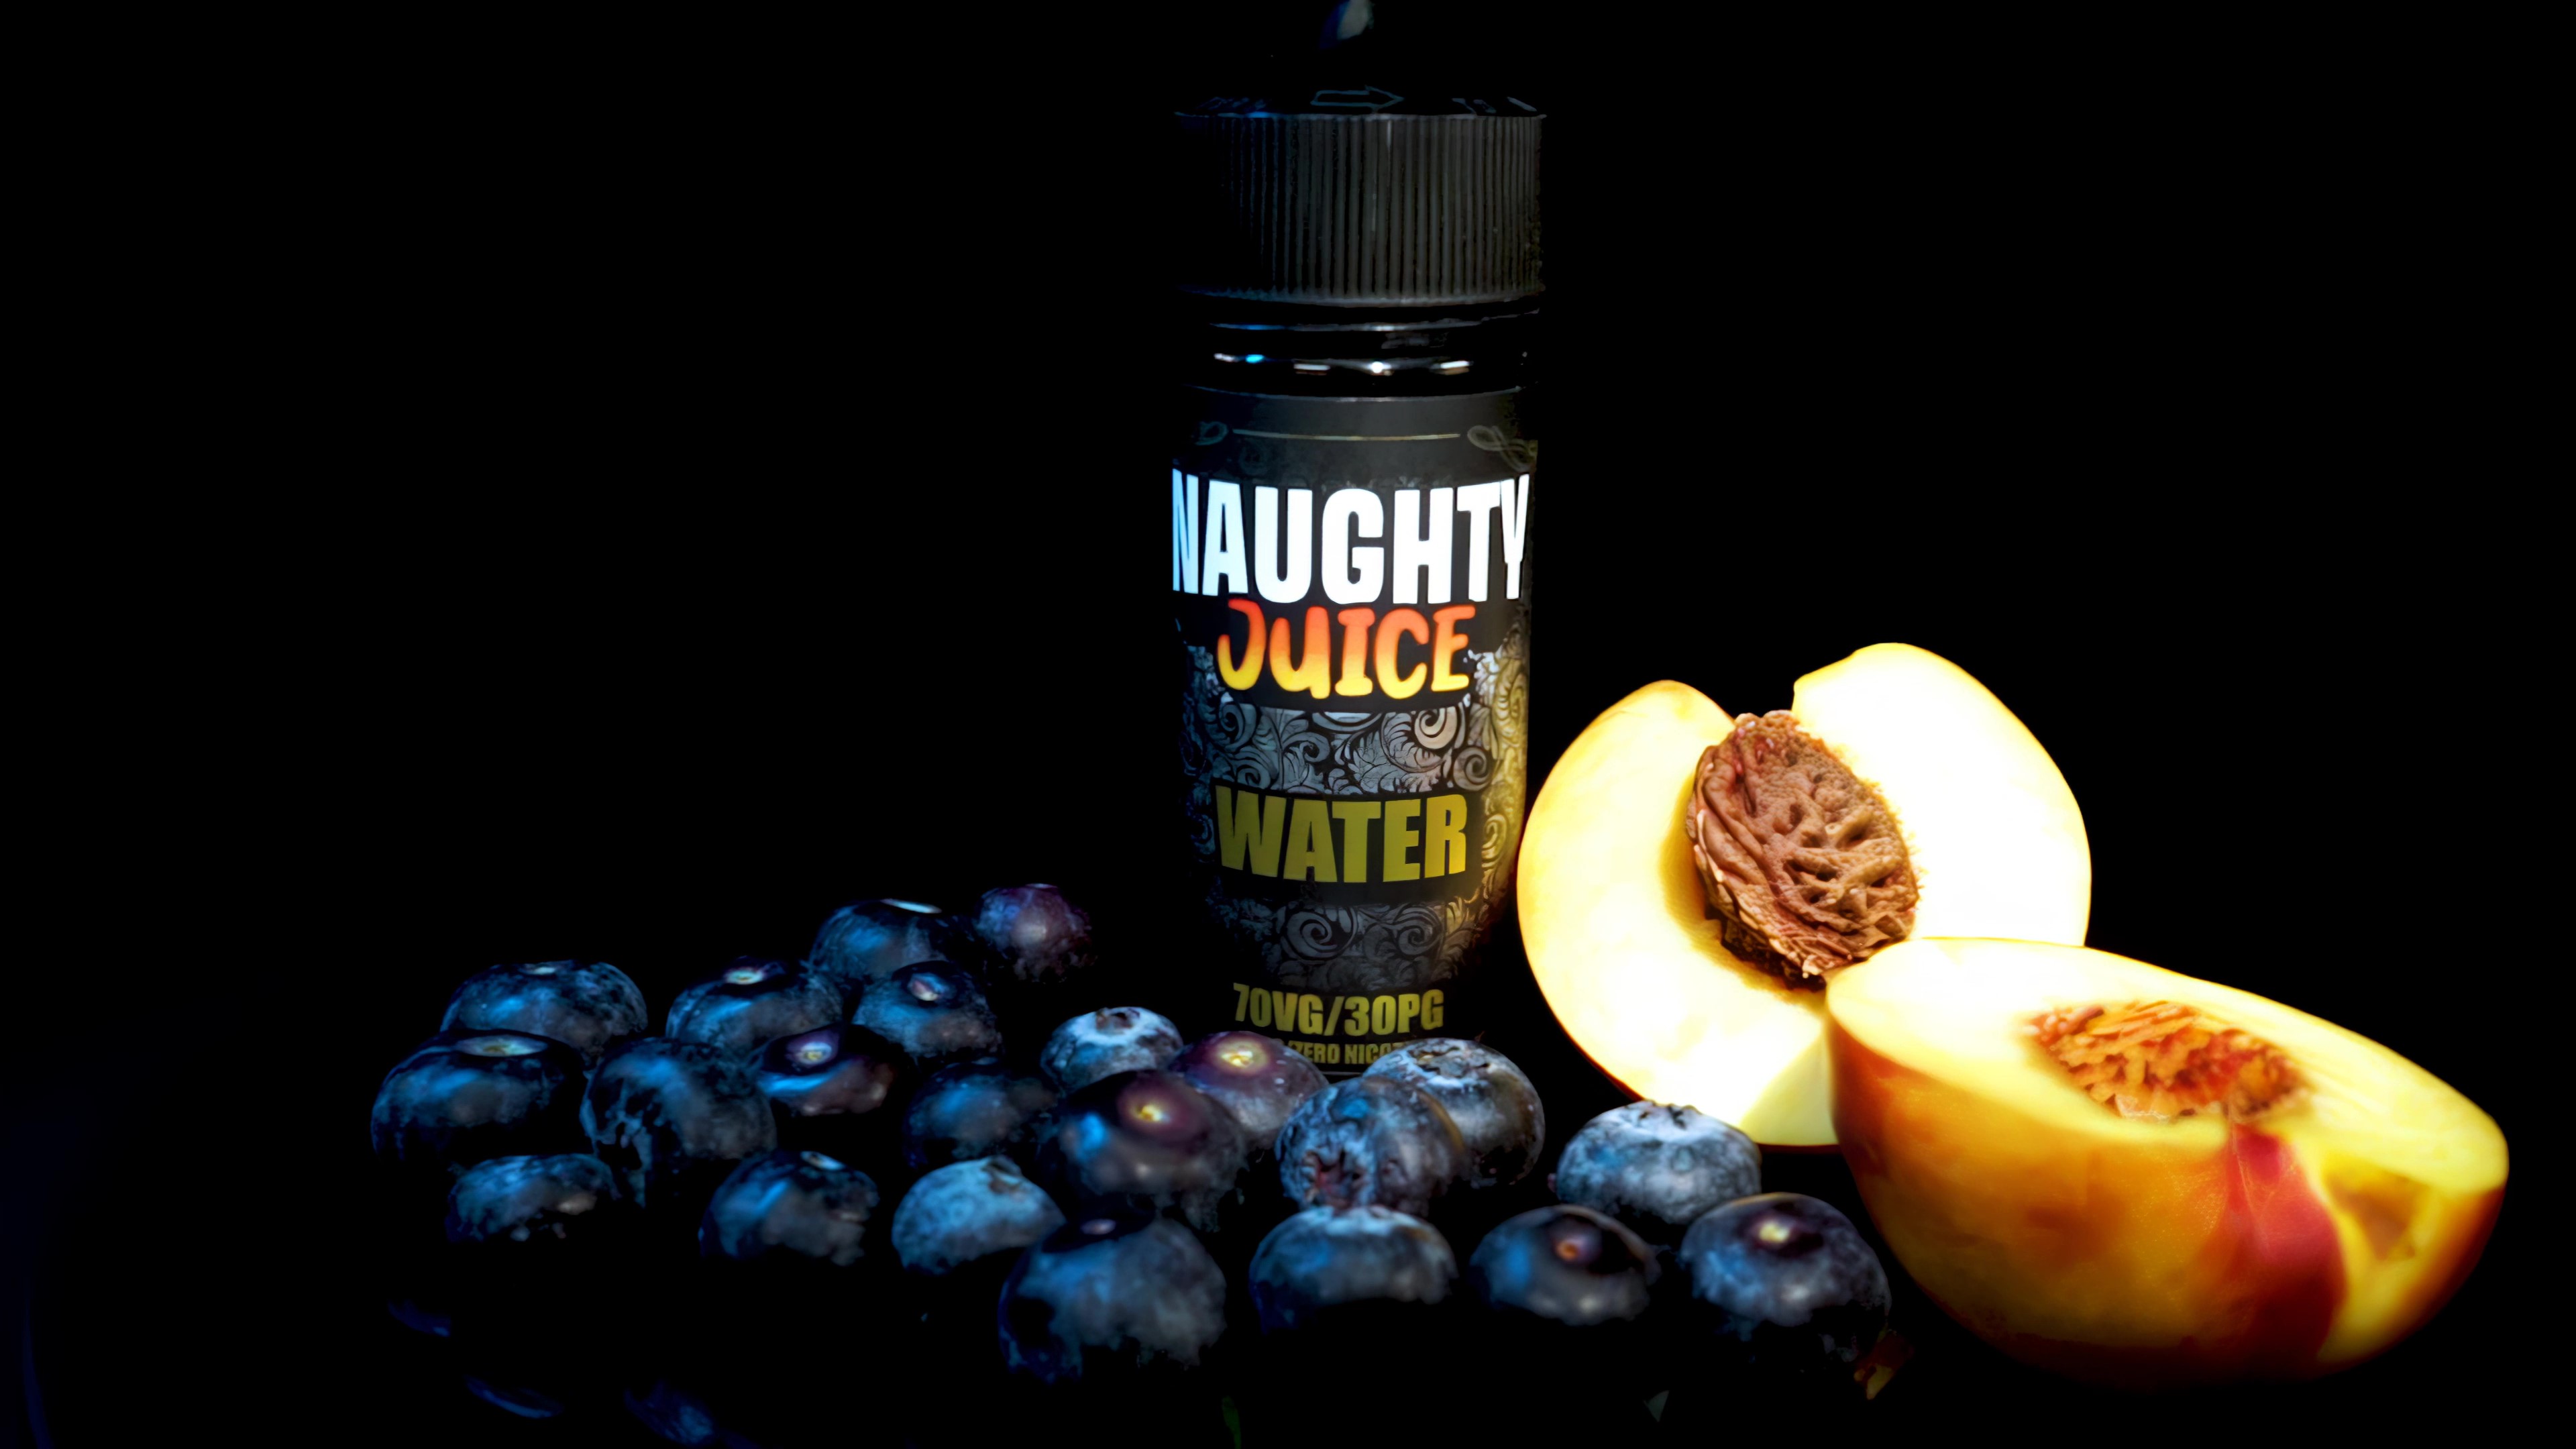 Naughty Juice Water Video Production
